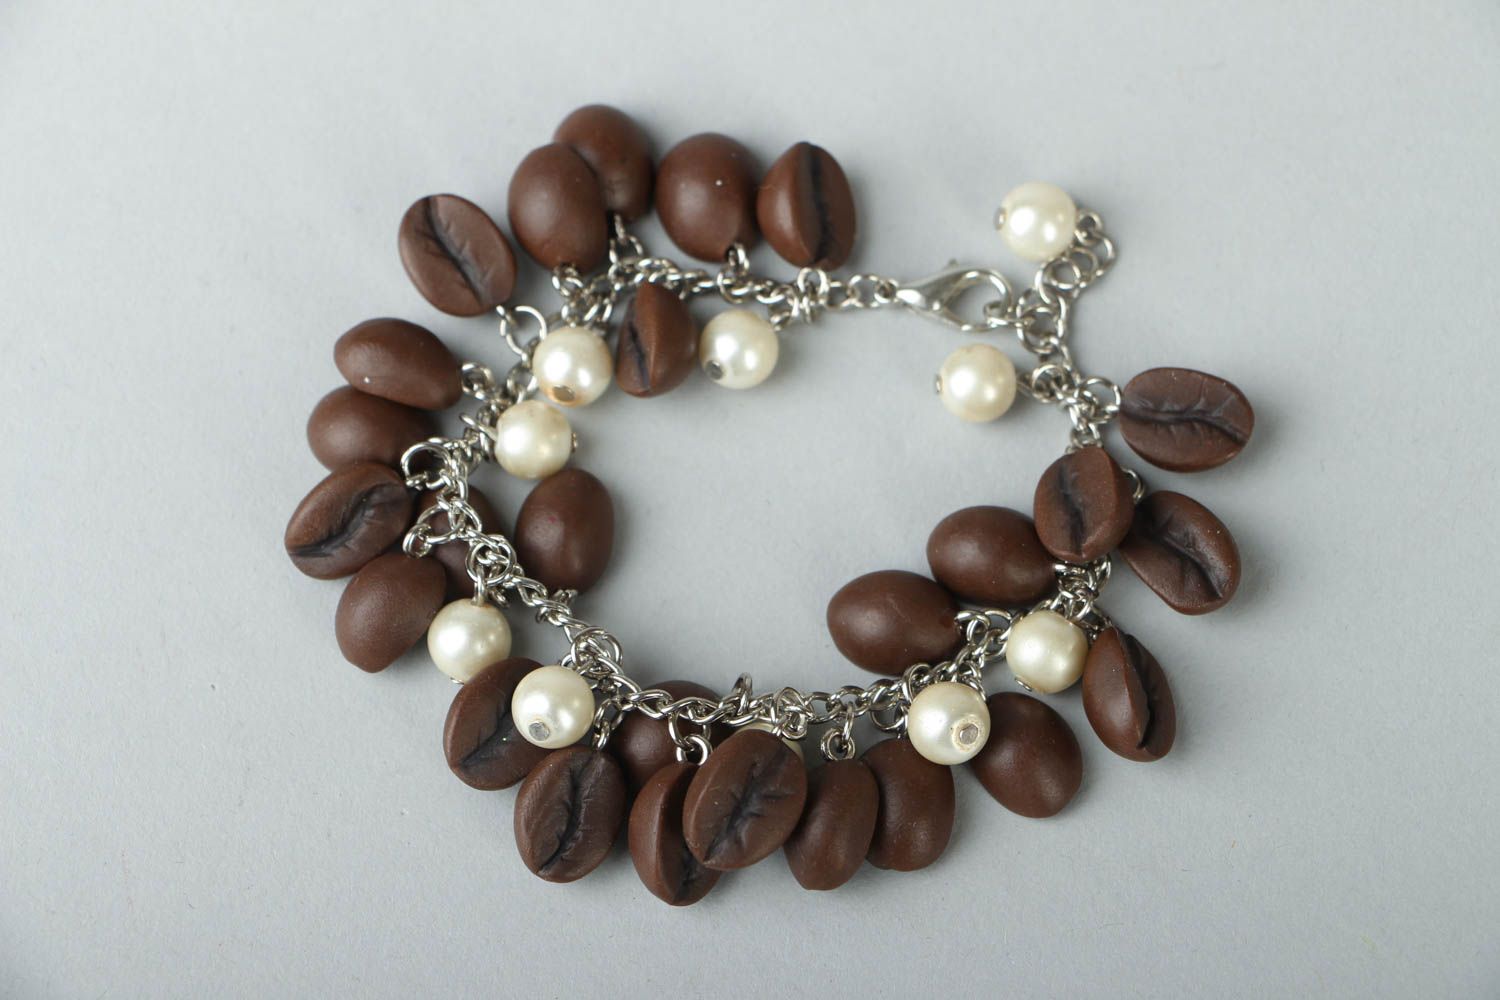 Coffee grains/ beans and pearls charm bracelet for girls photo 1